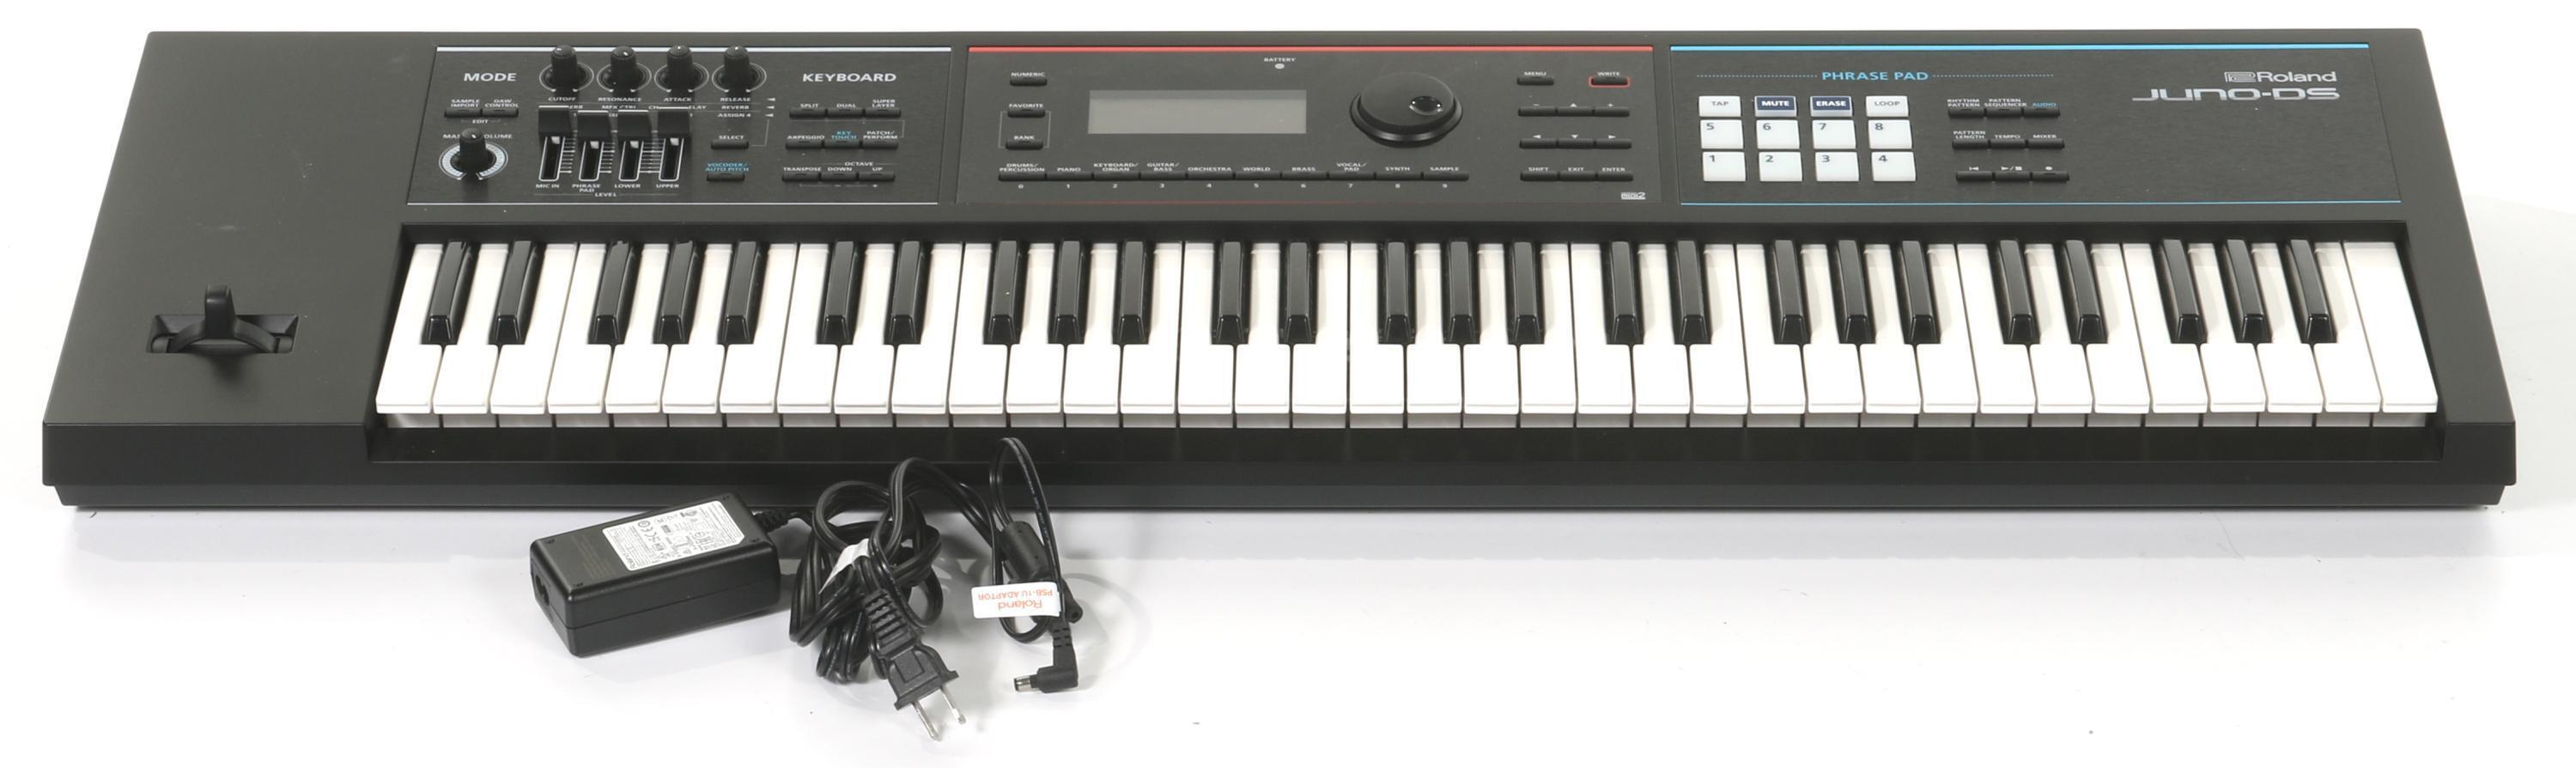 Roland JUNO-DS61 61-key Synthesizer Reviews | Sweetwater